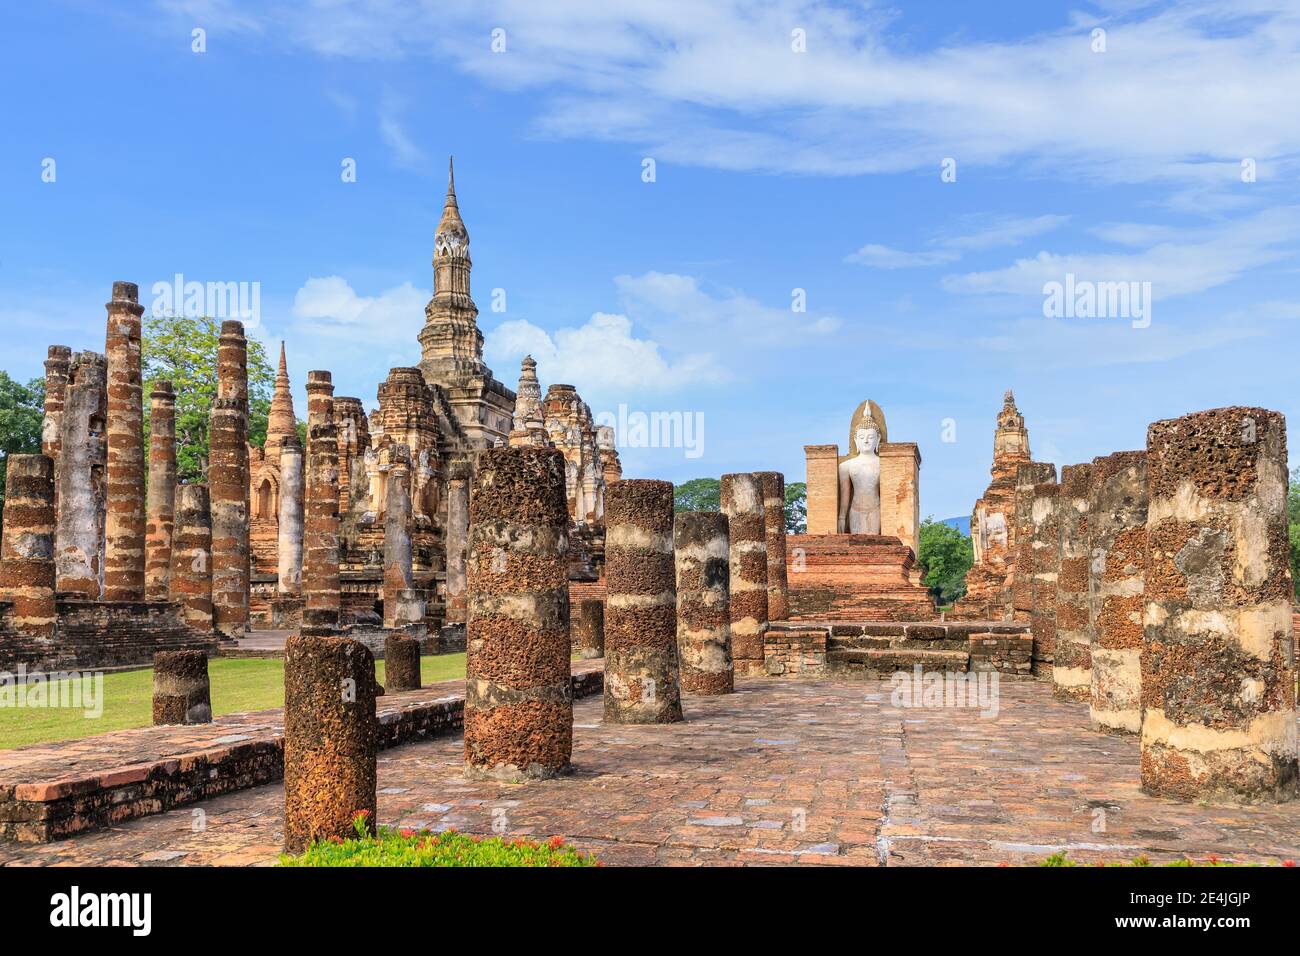 Standing Buddha statue in ruined chapel in monastery complex at Wat Mahathat temple, Sukhothai Historical Park, Thailand Stock Photo